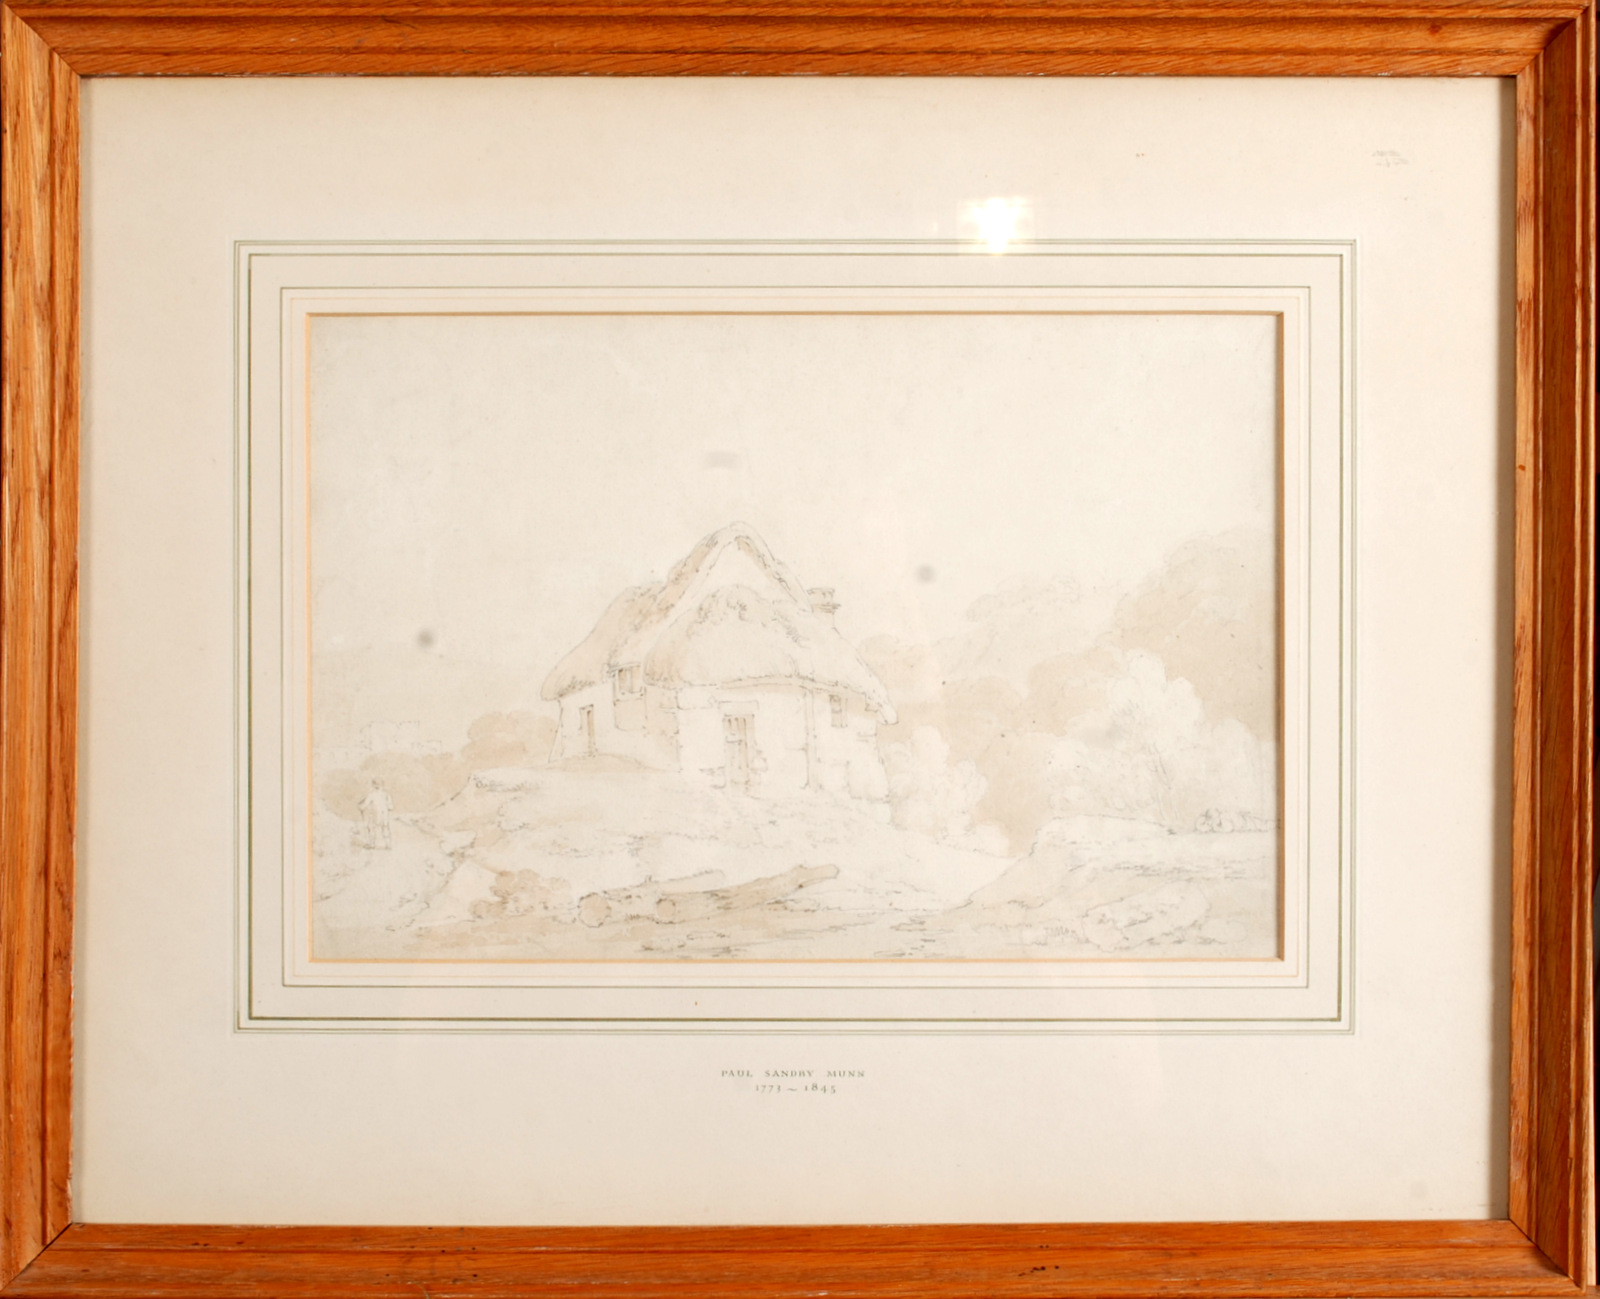 PAUL SANDBY MUNN A Country Cottage Pen and wash Inscribed in the mount 21 x 31 cm - Image 2 of 2